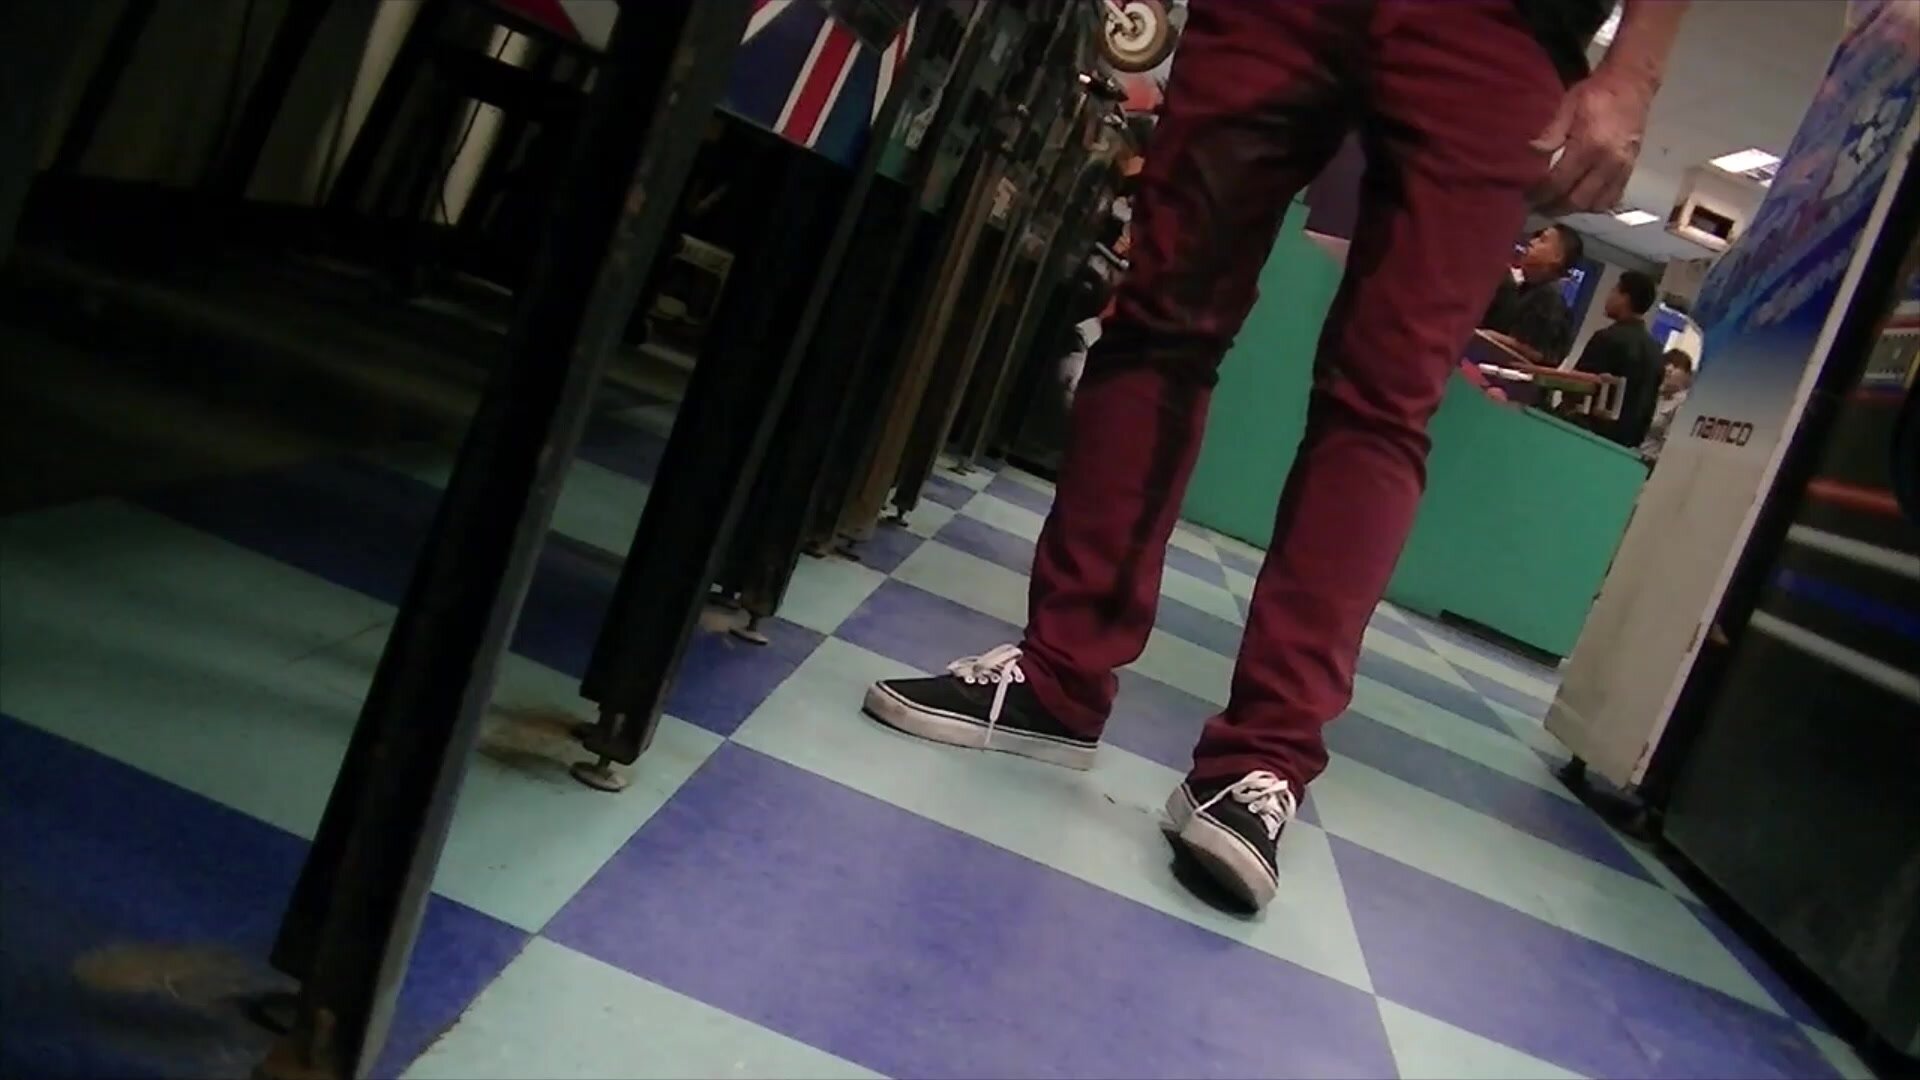 Wet my red skinny pants at the arcade